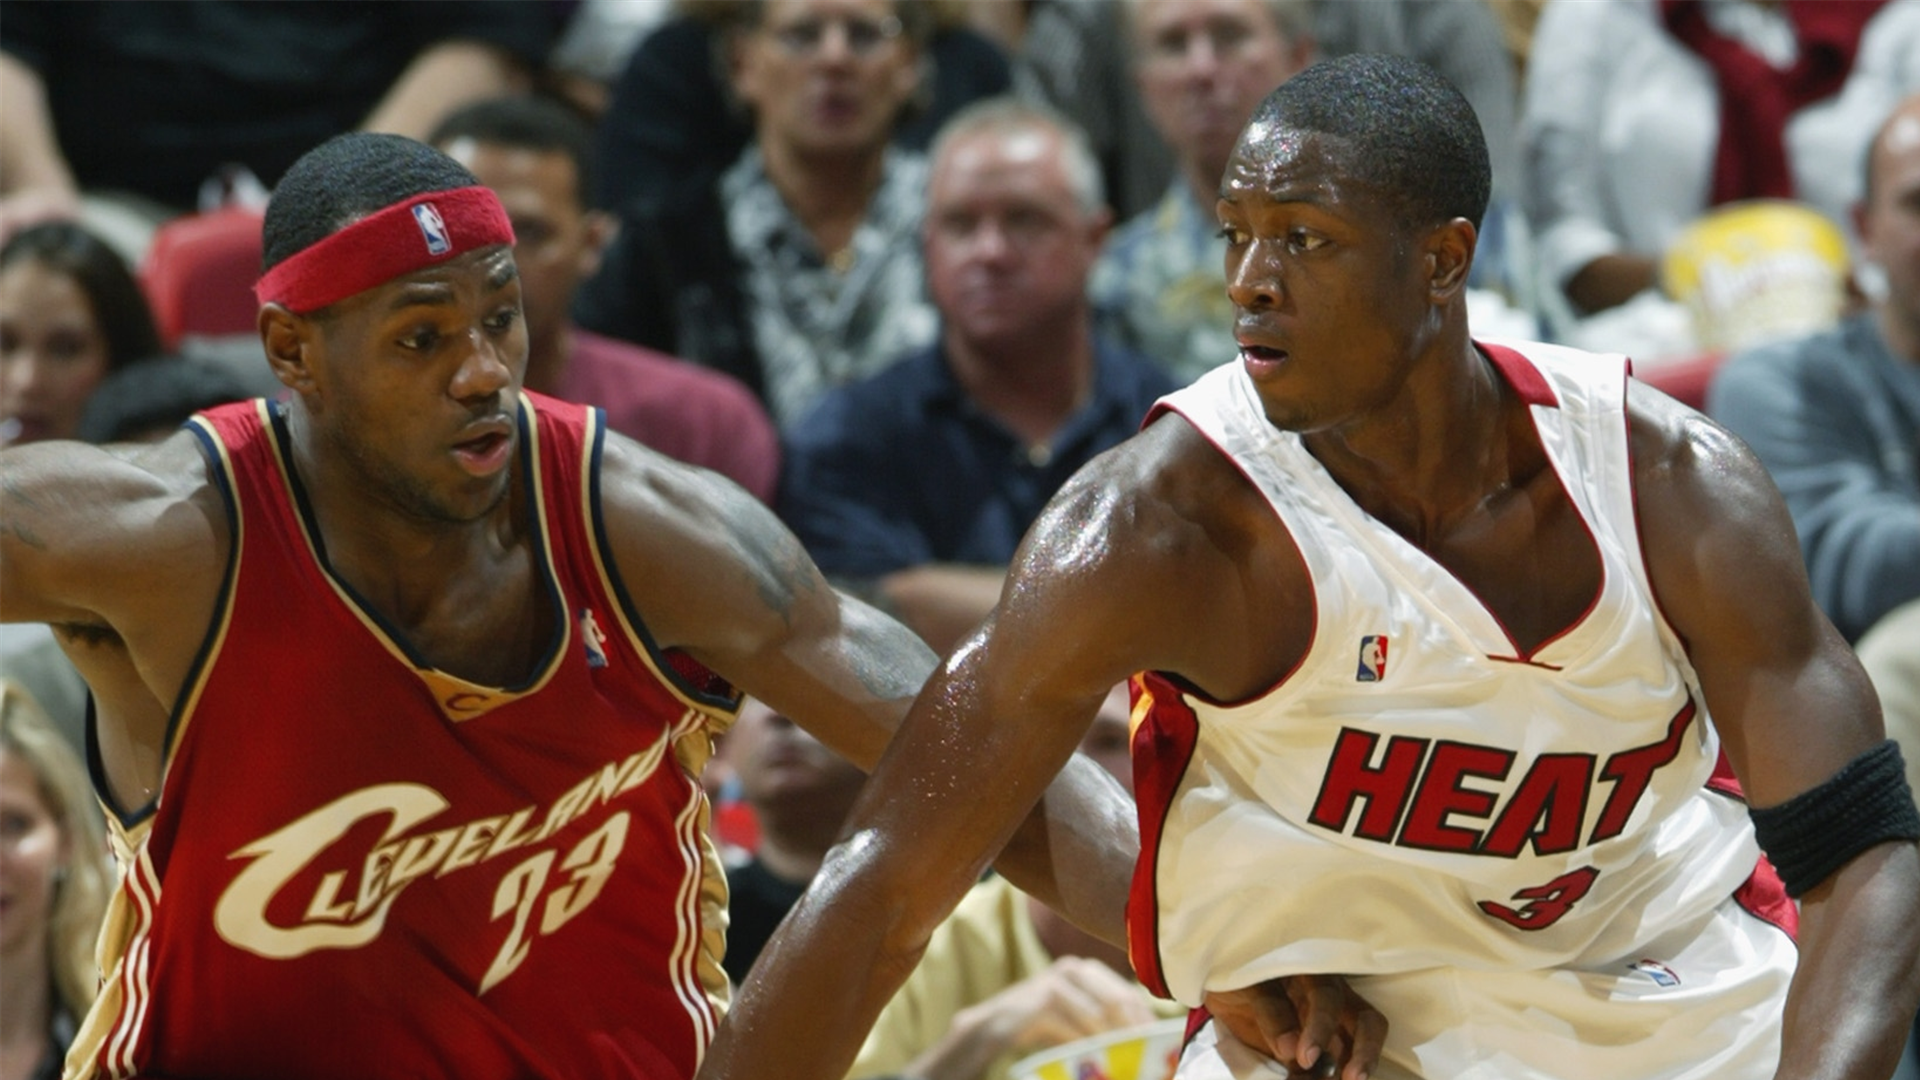 Dwyane Wade and LeBron James: the final meeting, their best games, head